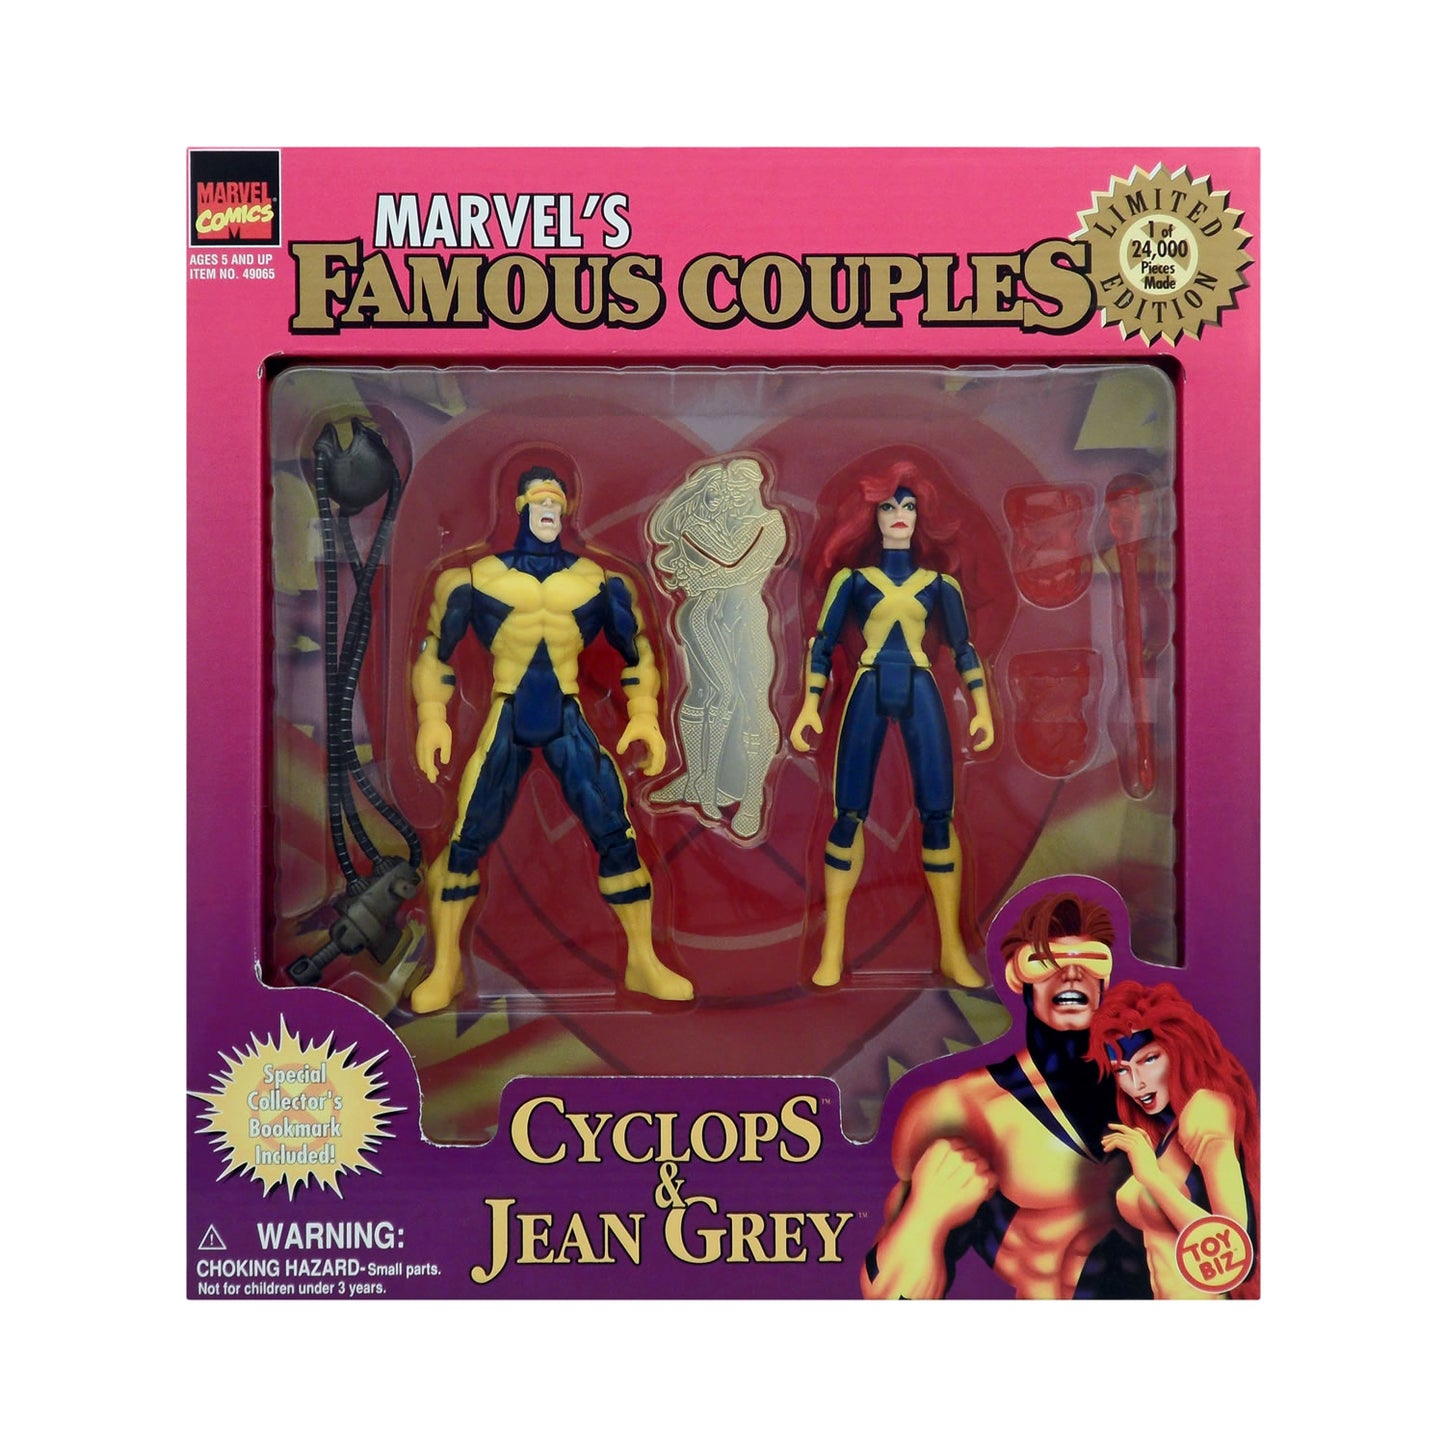 Marvel's Famous Couples Cyclops & Jean Grey